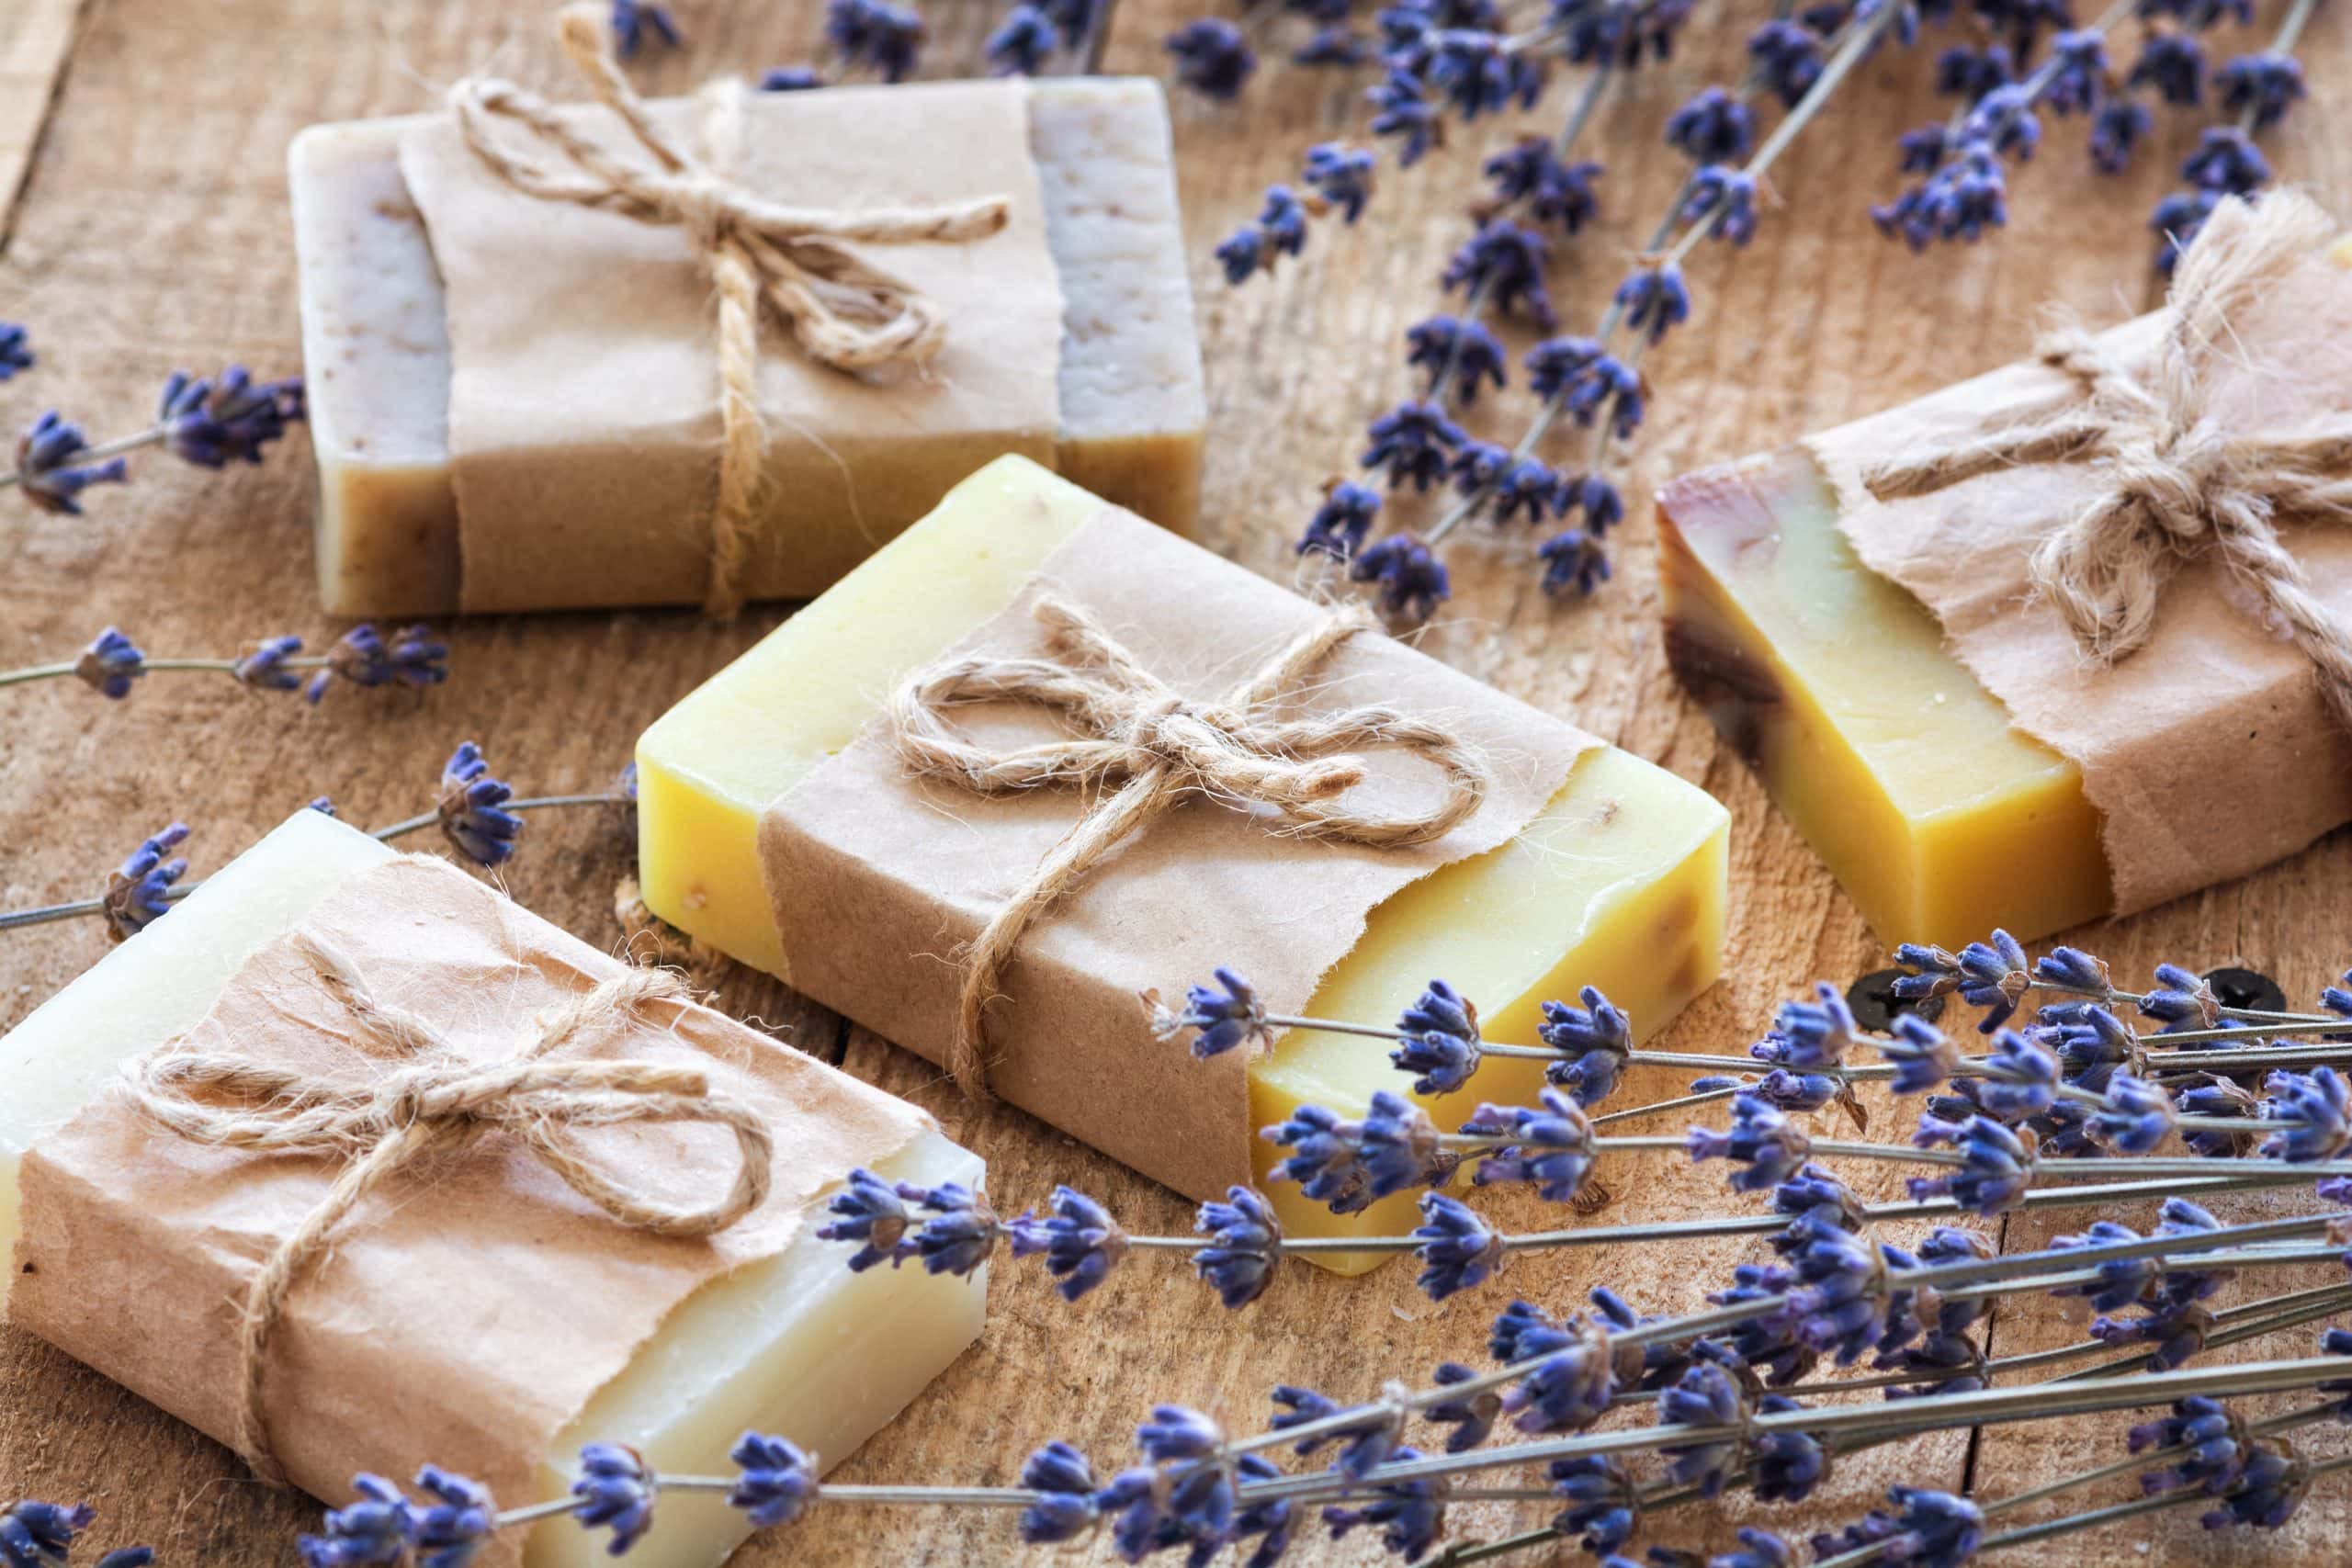 Several bars of handmade soap are packaged neartly with kraft paper around the middle and baker's twine wrapped into bows. There are lavendar springs all around the soap, which is sitting on a wood tabletop.